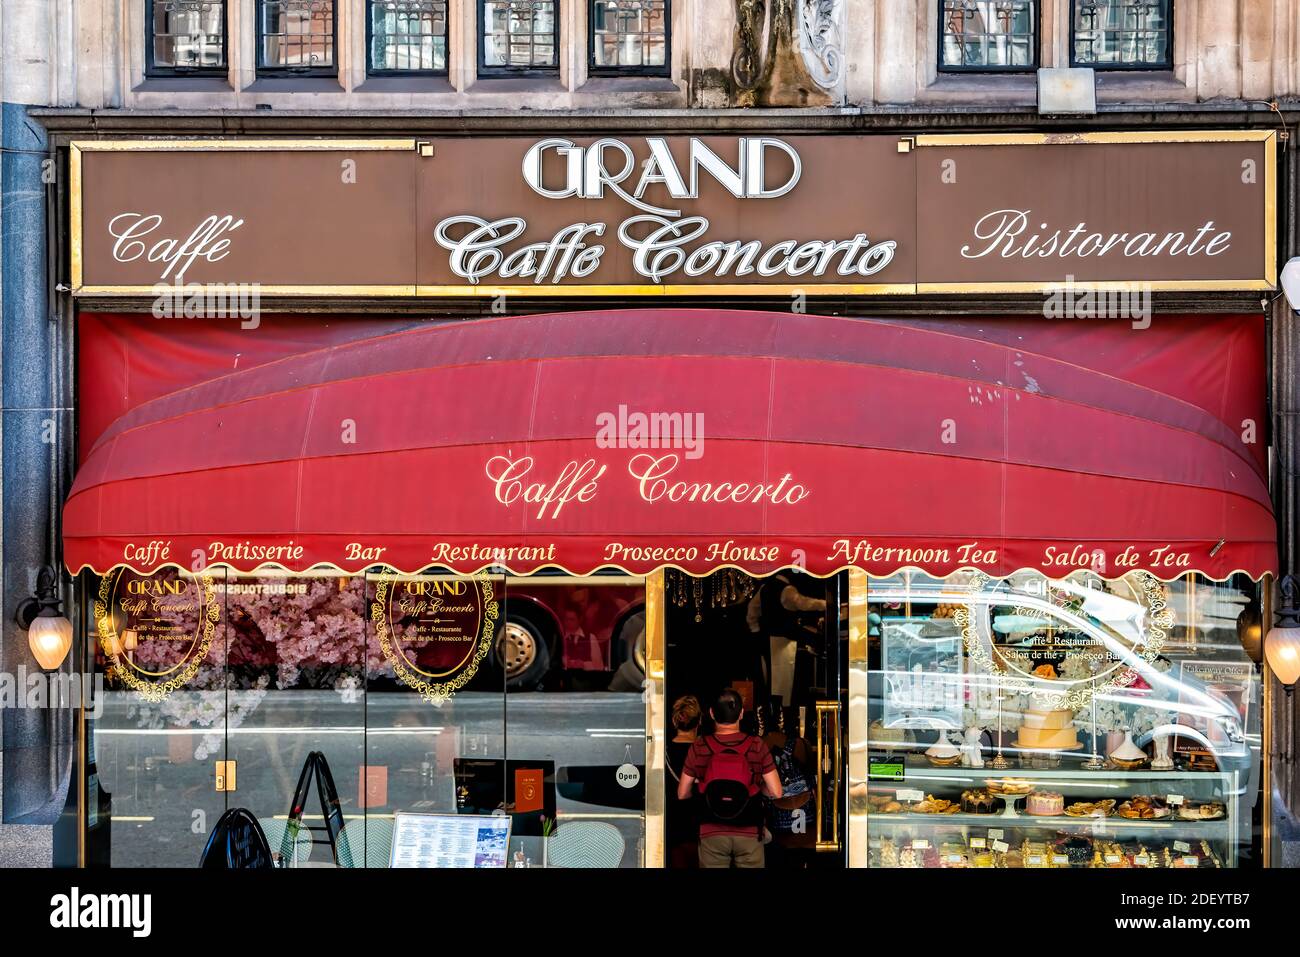 London, UK - June 22, 2018: Italian cafe Caffe Concerto restaurant with red retro vintage design on building entrance and menu on Whitehall road stree Stock Photo